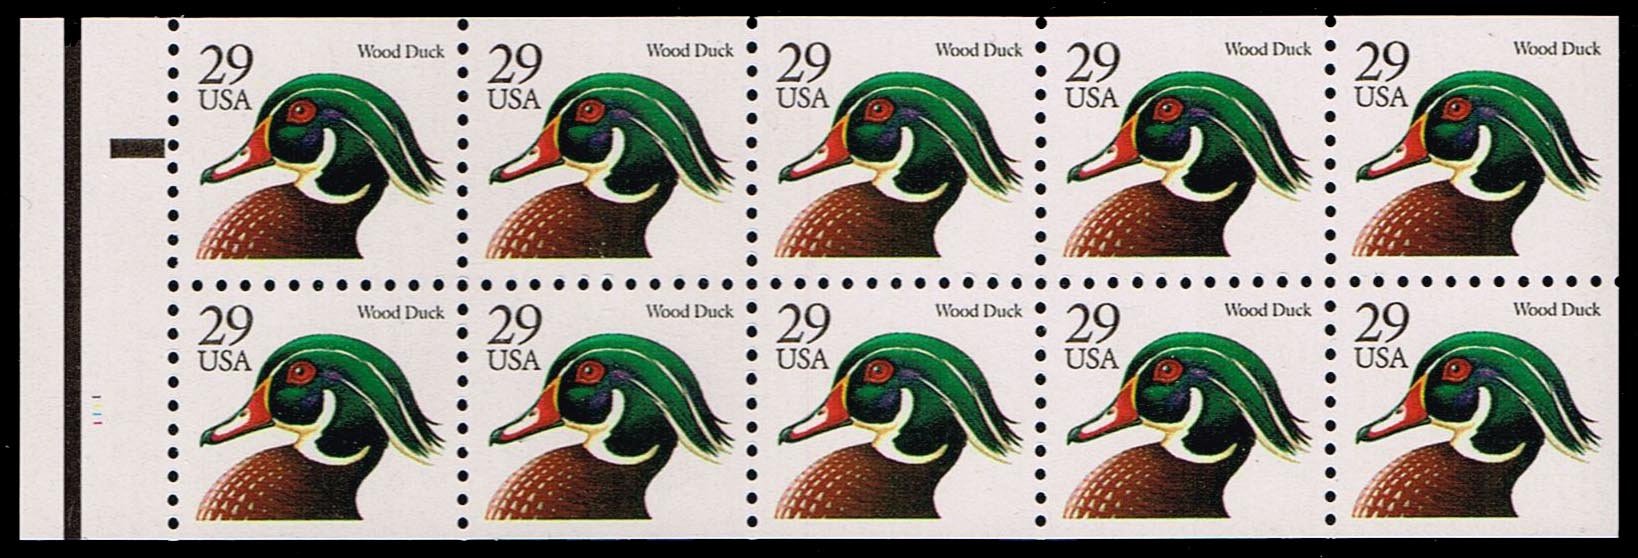 US #2484a Wood Duck Booklet Pane of 10; MNH - Click Image to Close